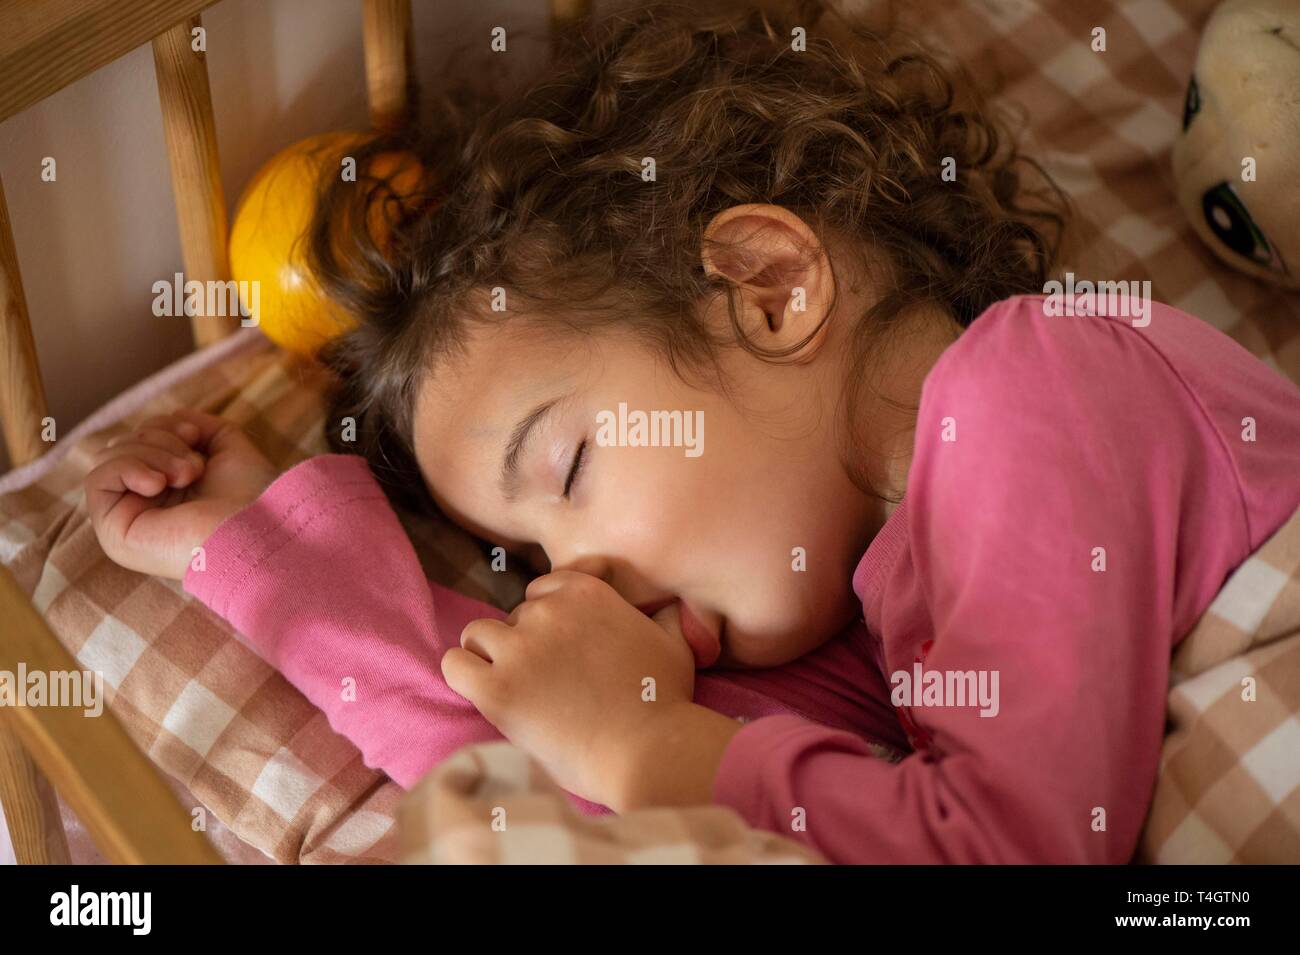 Girl, 3 years, portrait, sleeps in bed, with thumb in mouth, Germany Stock Photo